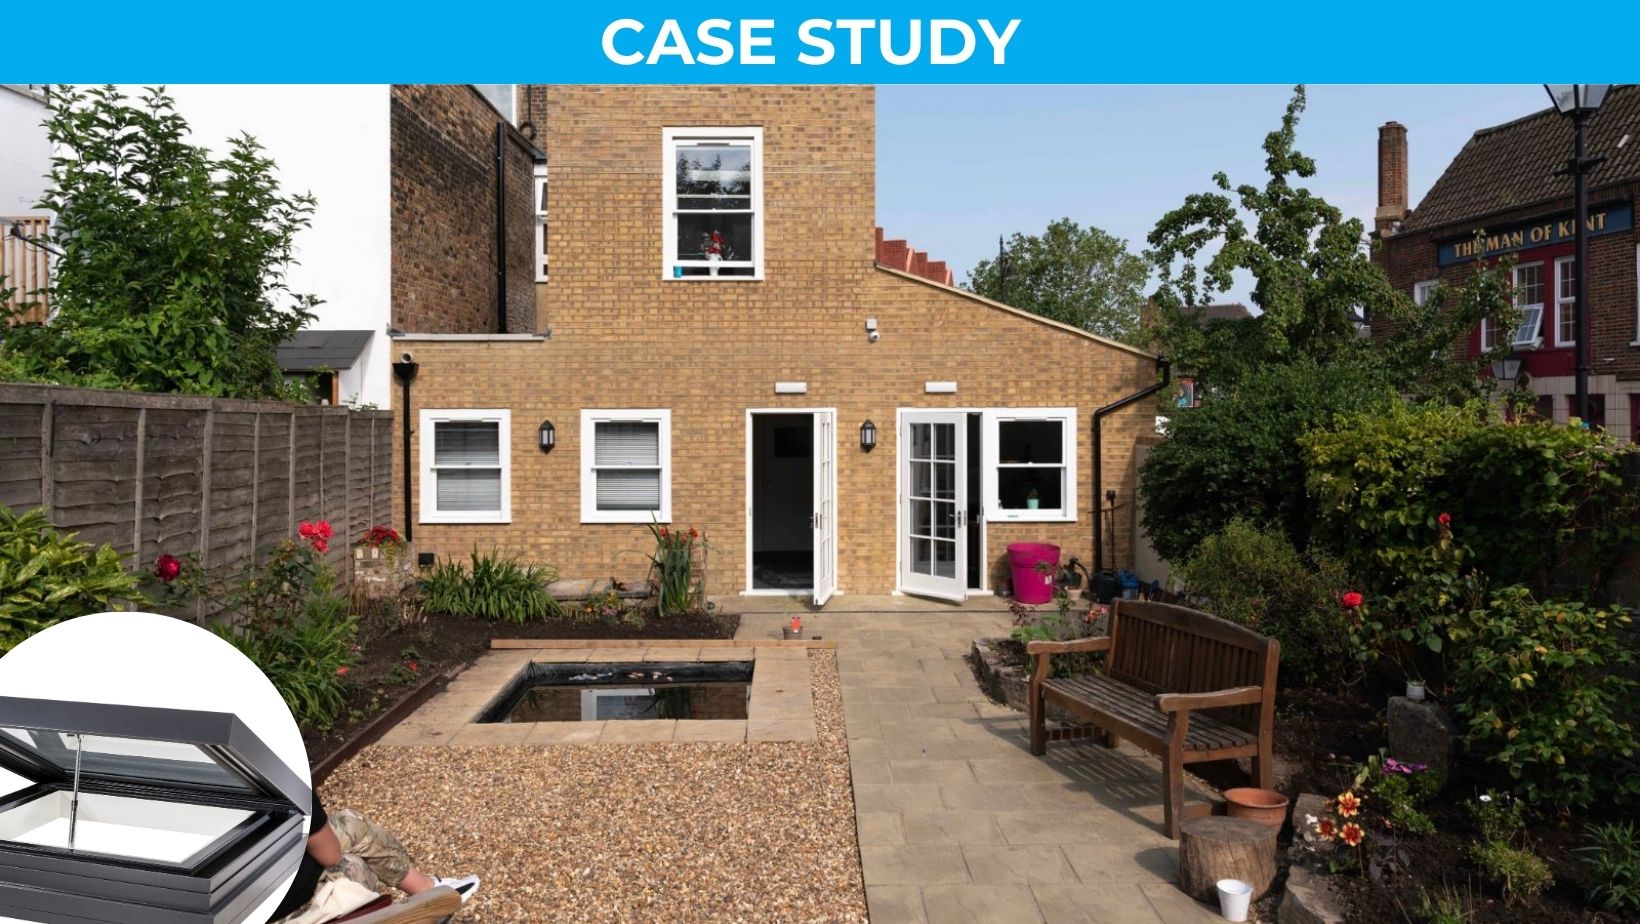 Manual VisionVent Integrated Into A Move-On House For Those Experiencing Homelessness With The CRASH Charity